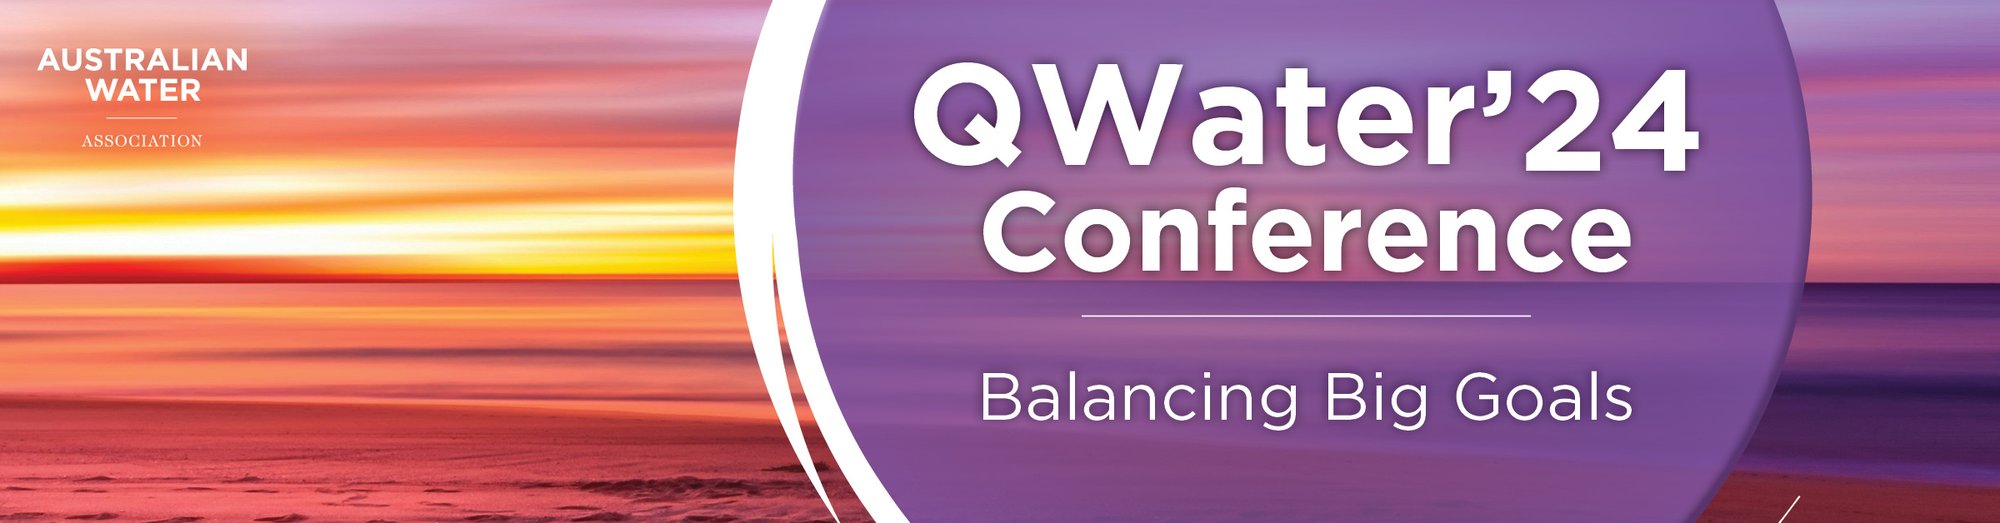 QWater24 Conference_HubSpot Event Banner 1200x314px_converted